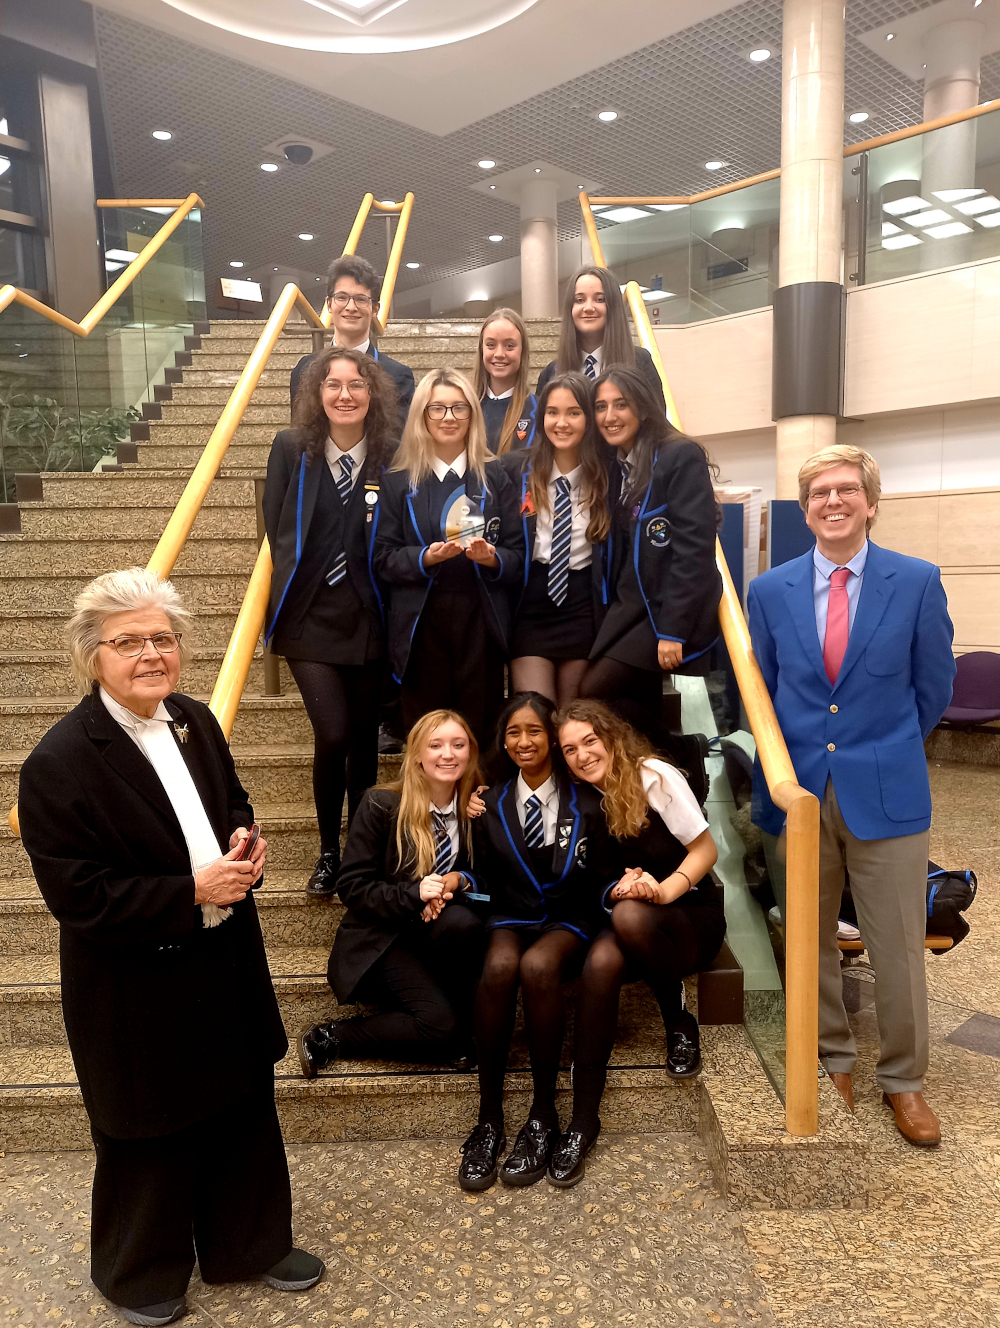 School debating finalists receive ongoing support from Faculty